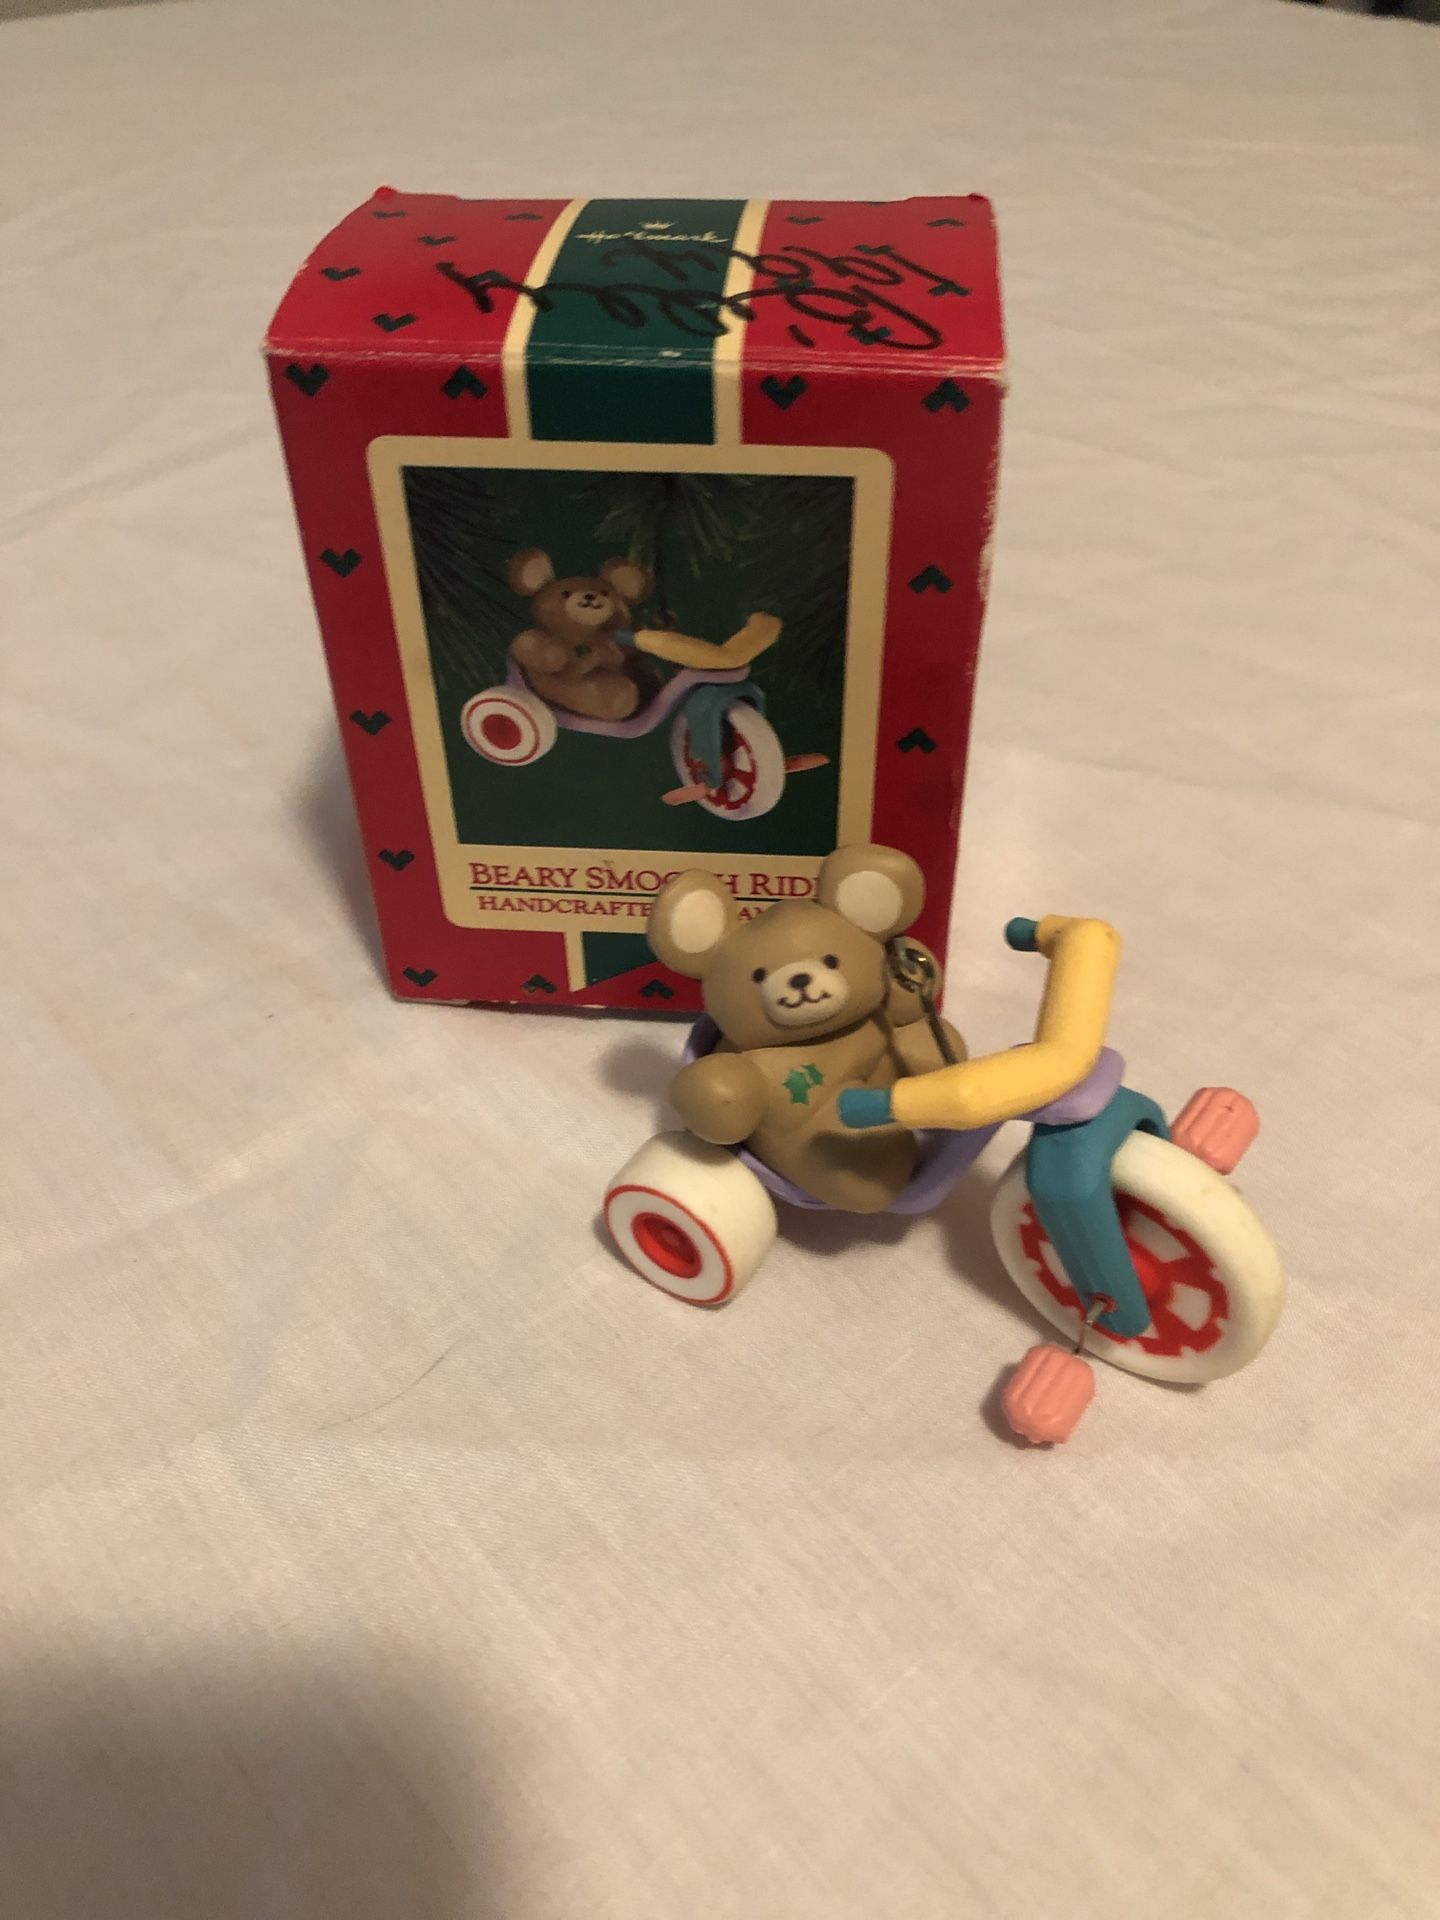 Beary Smooth Ride Hand Crafted Hallmark Ornament